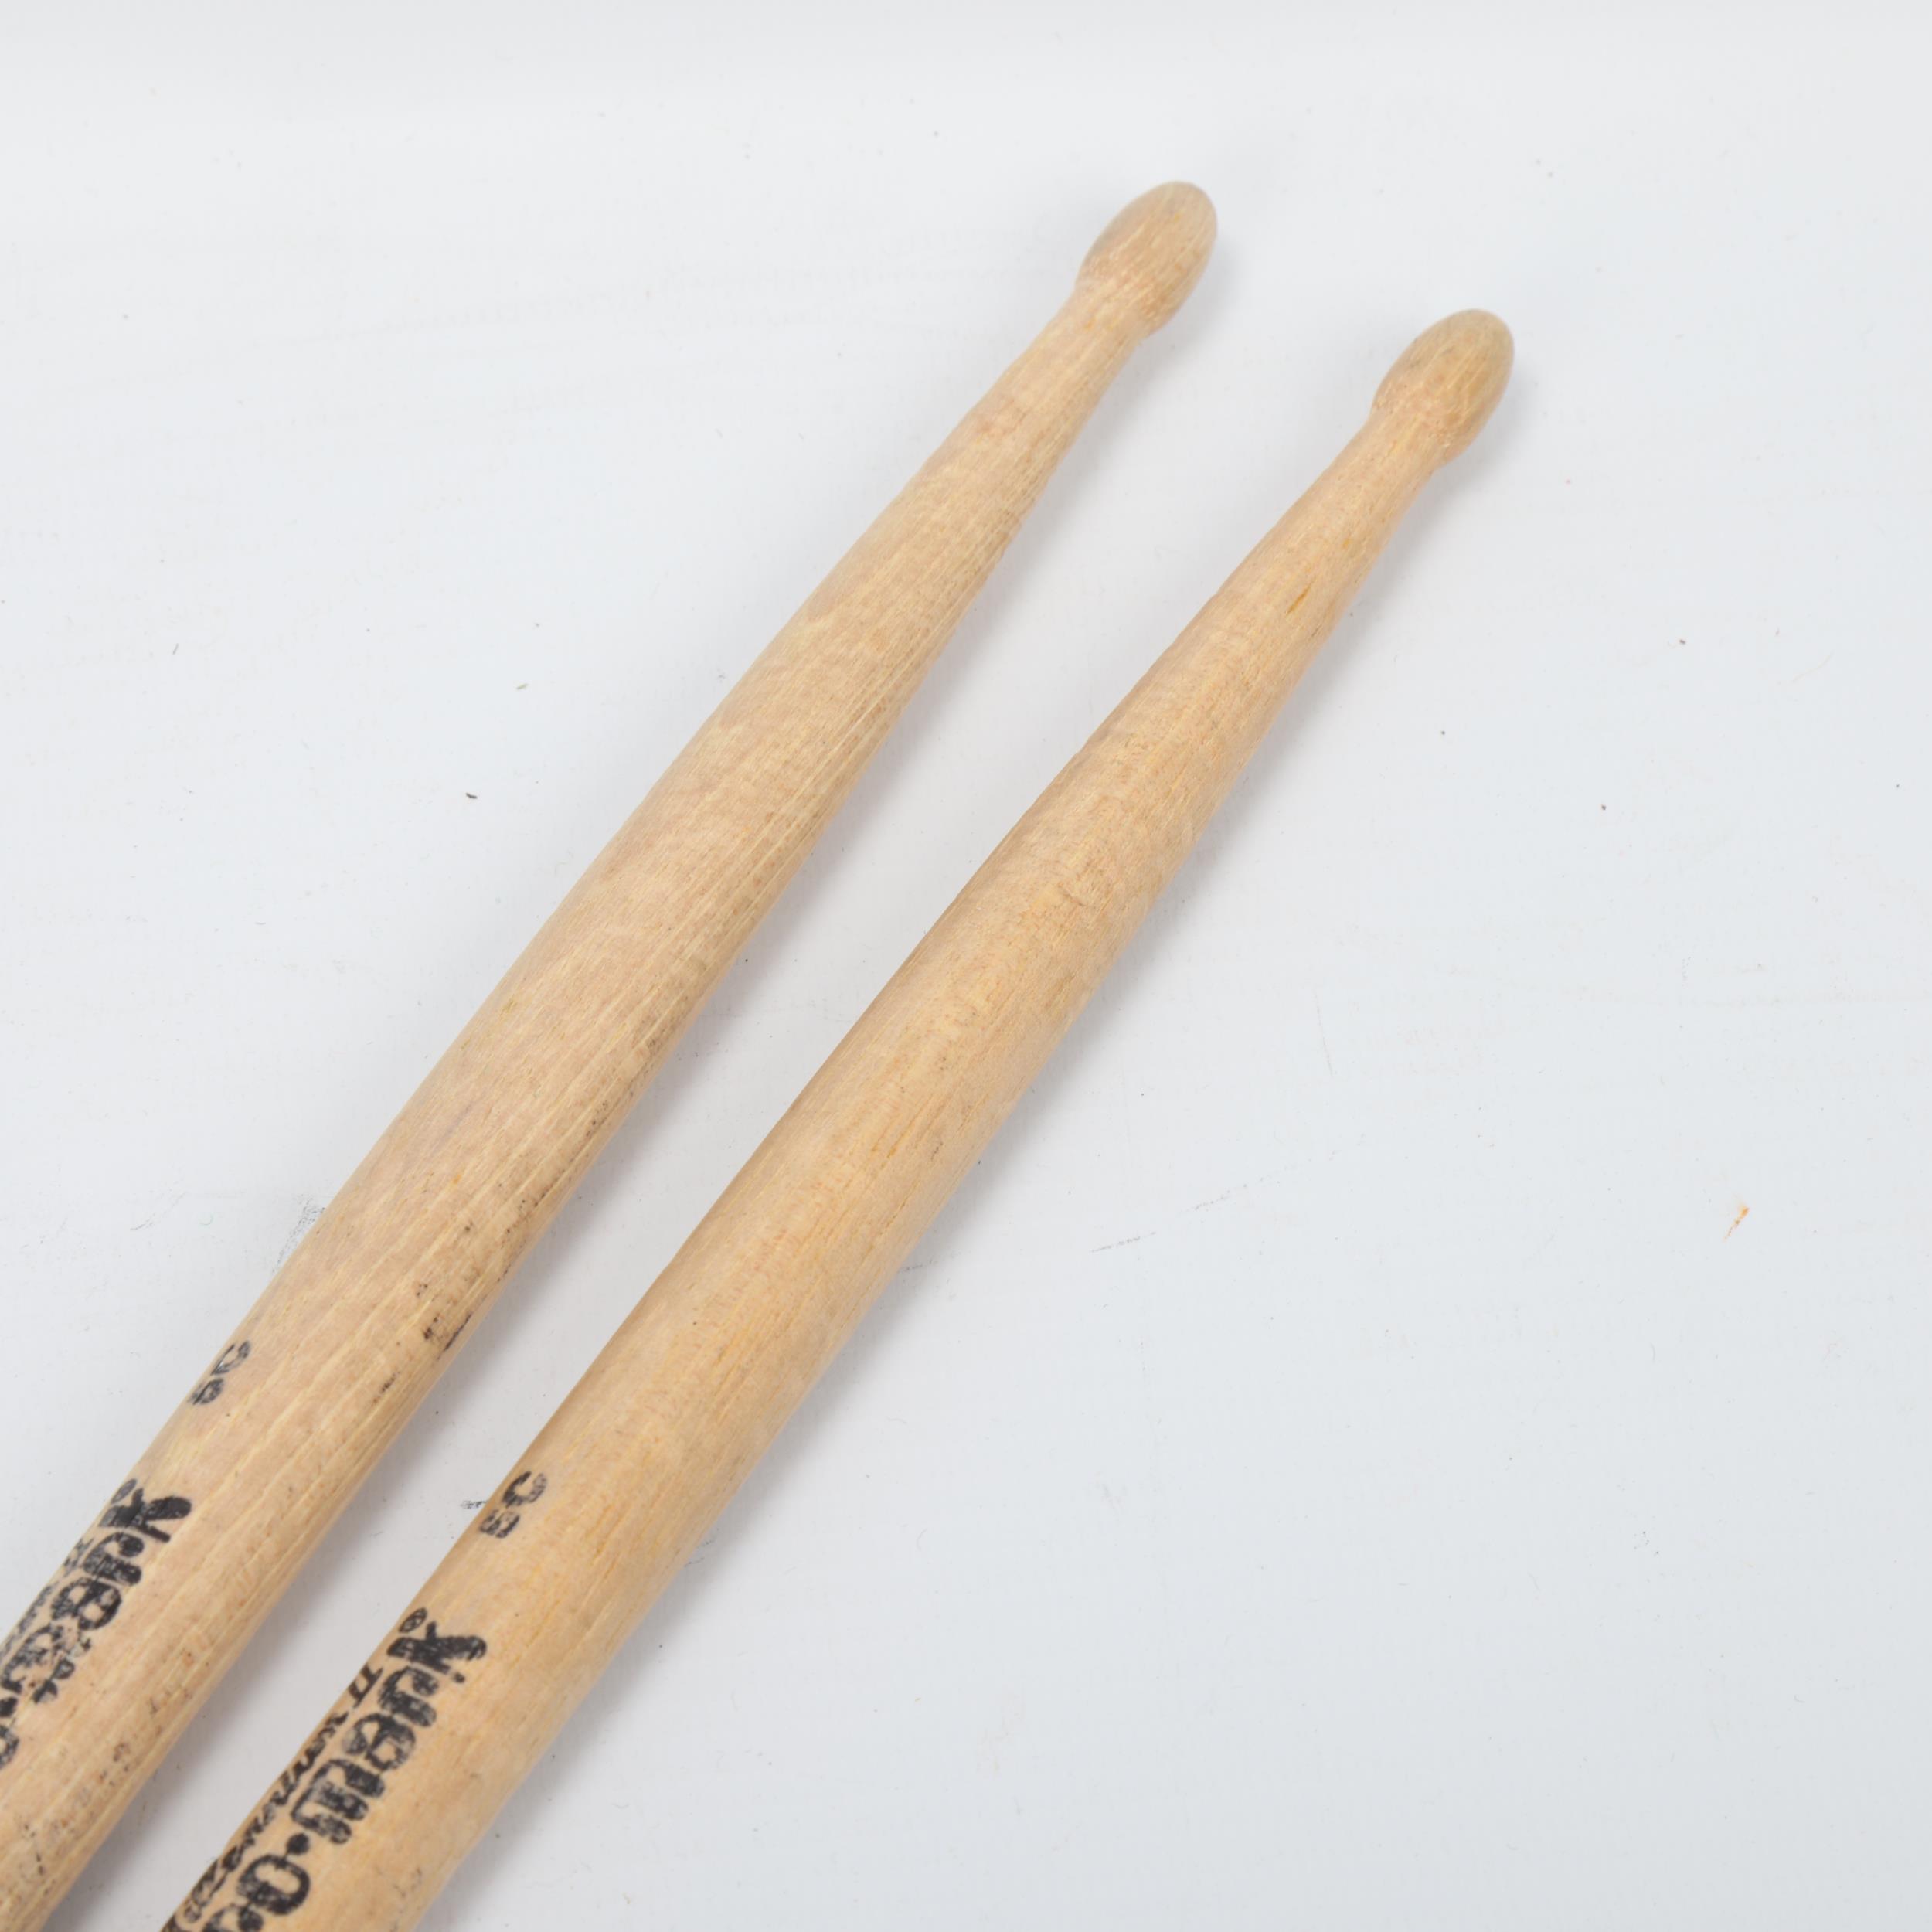 Two USED PROMARK 'CHARLIE ADAMS 5C' Hickory DRUMSTICKS belonging to MITCH MITCHELL - Image 3 of 3